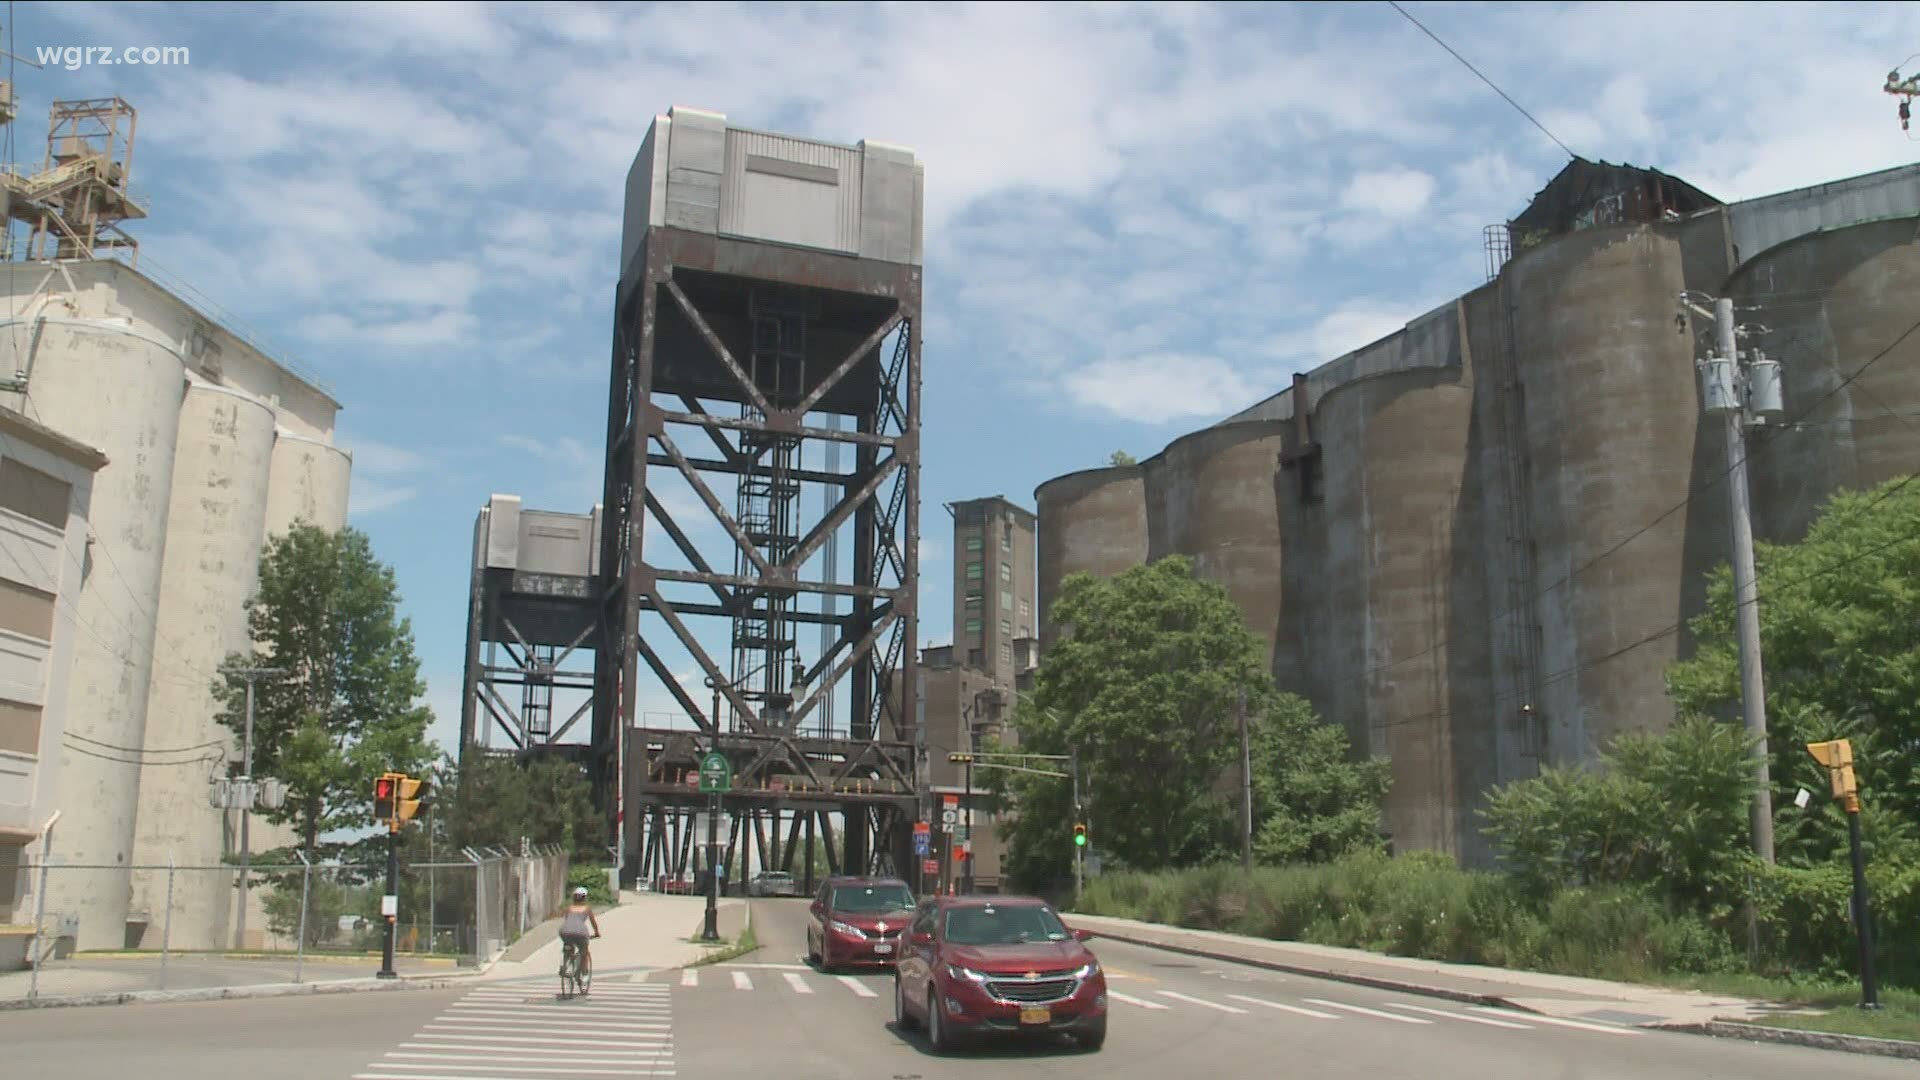 The bridge is going under a 15 million dollar rehabilitation project and is expected to be closed until next summer.